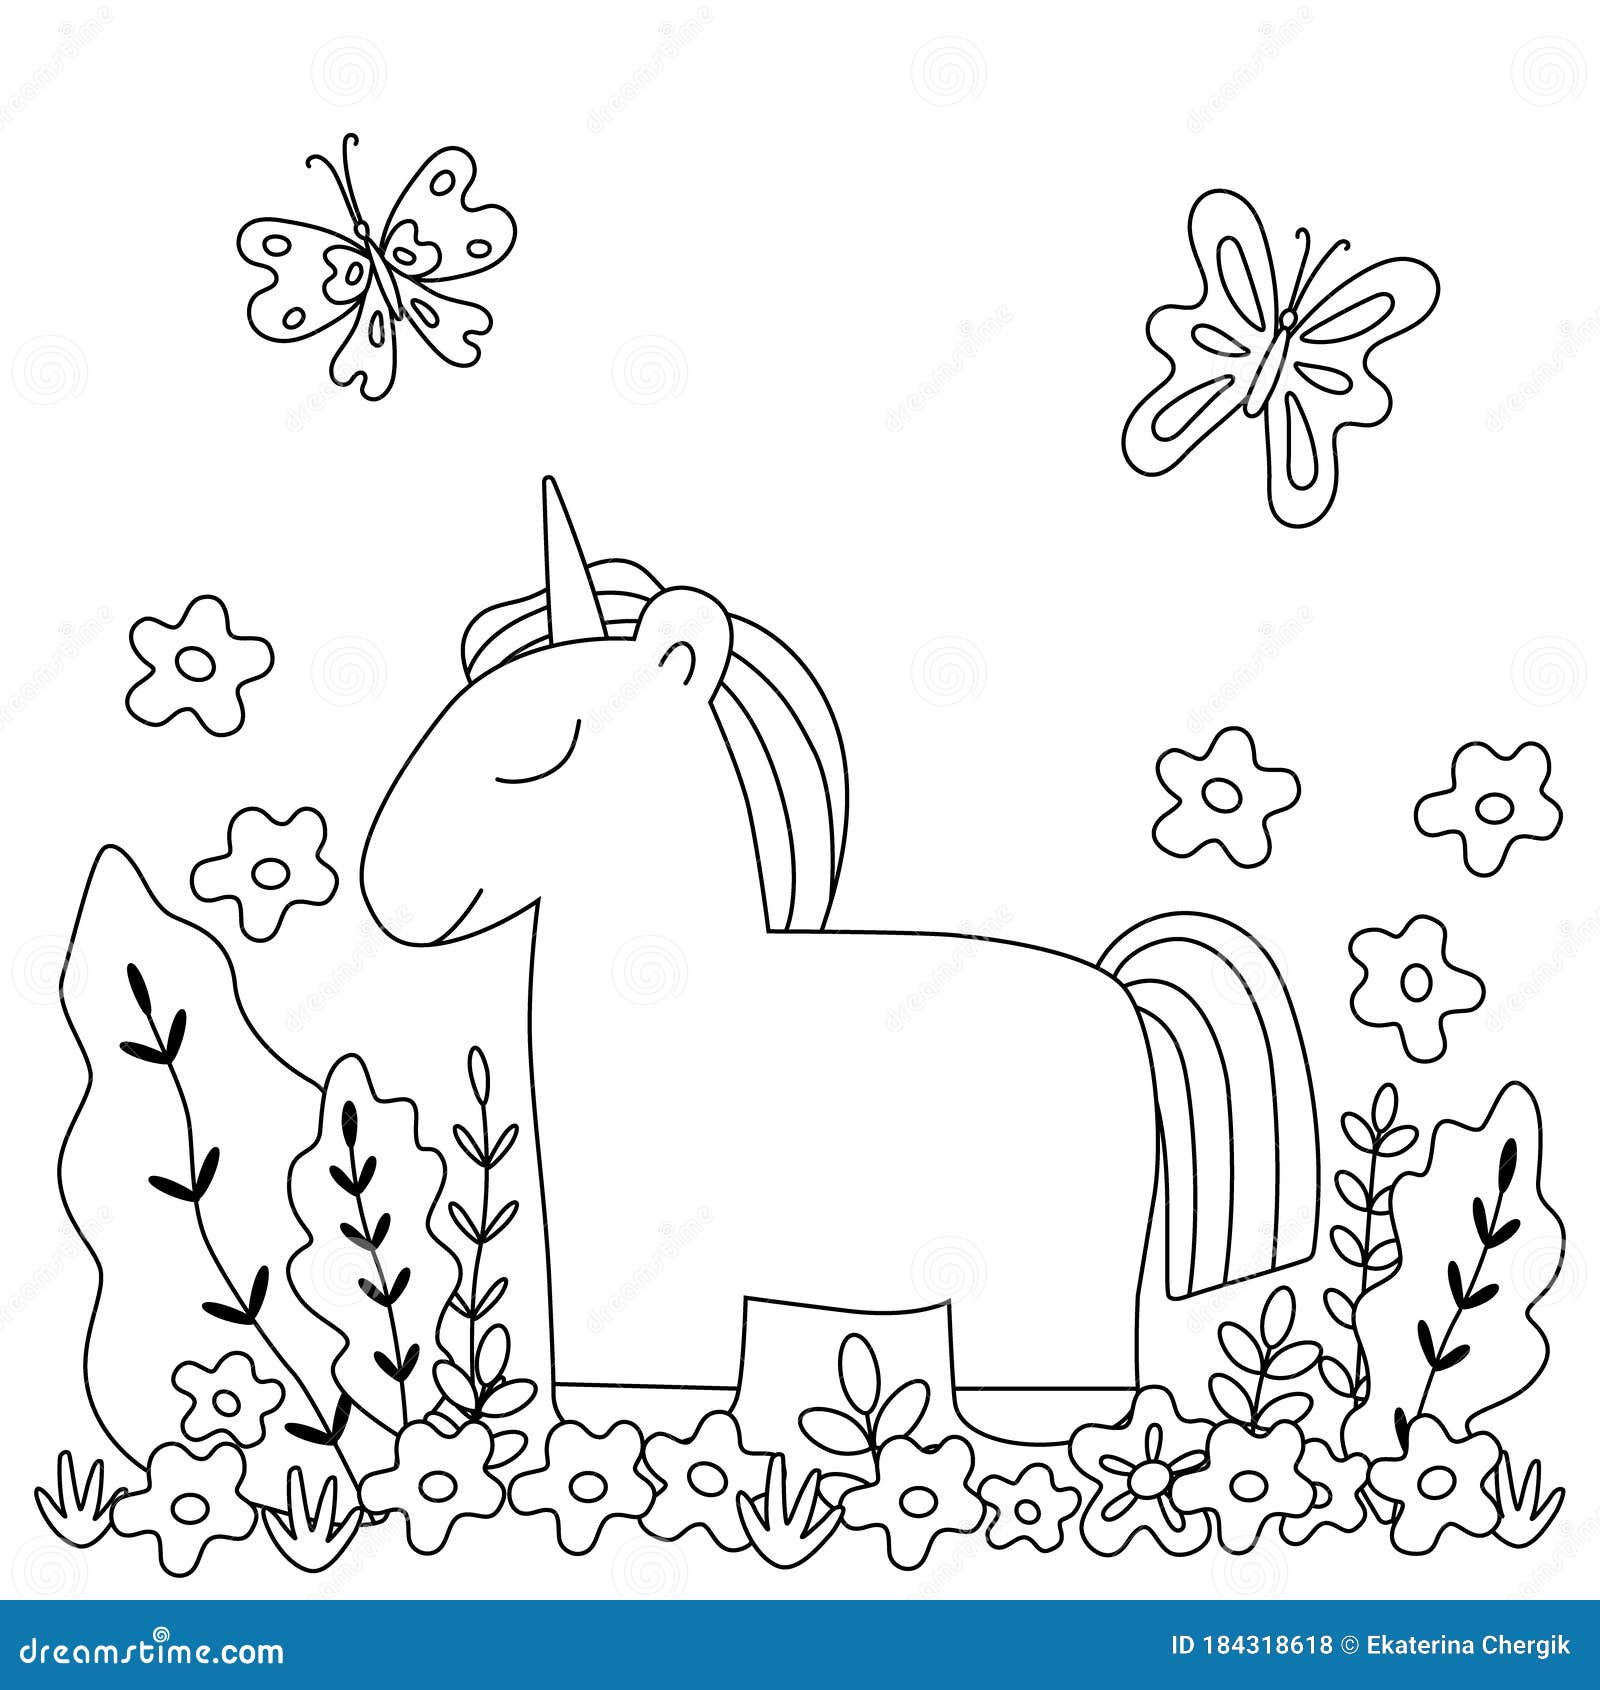 Kids Coloring Book with Unicorn, Butterflies. Stock Vector ...